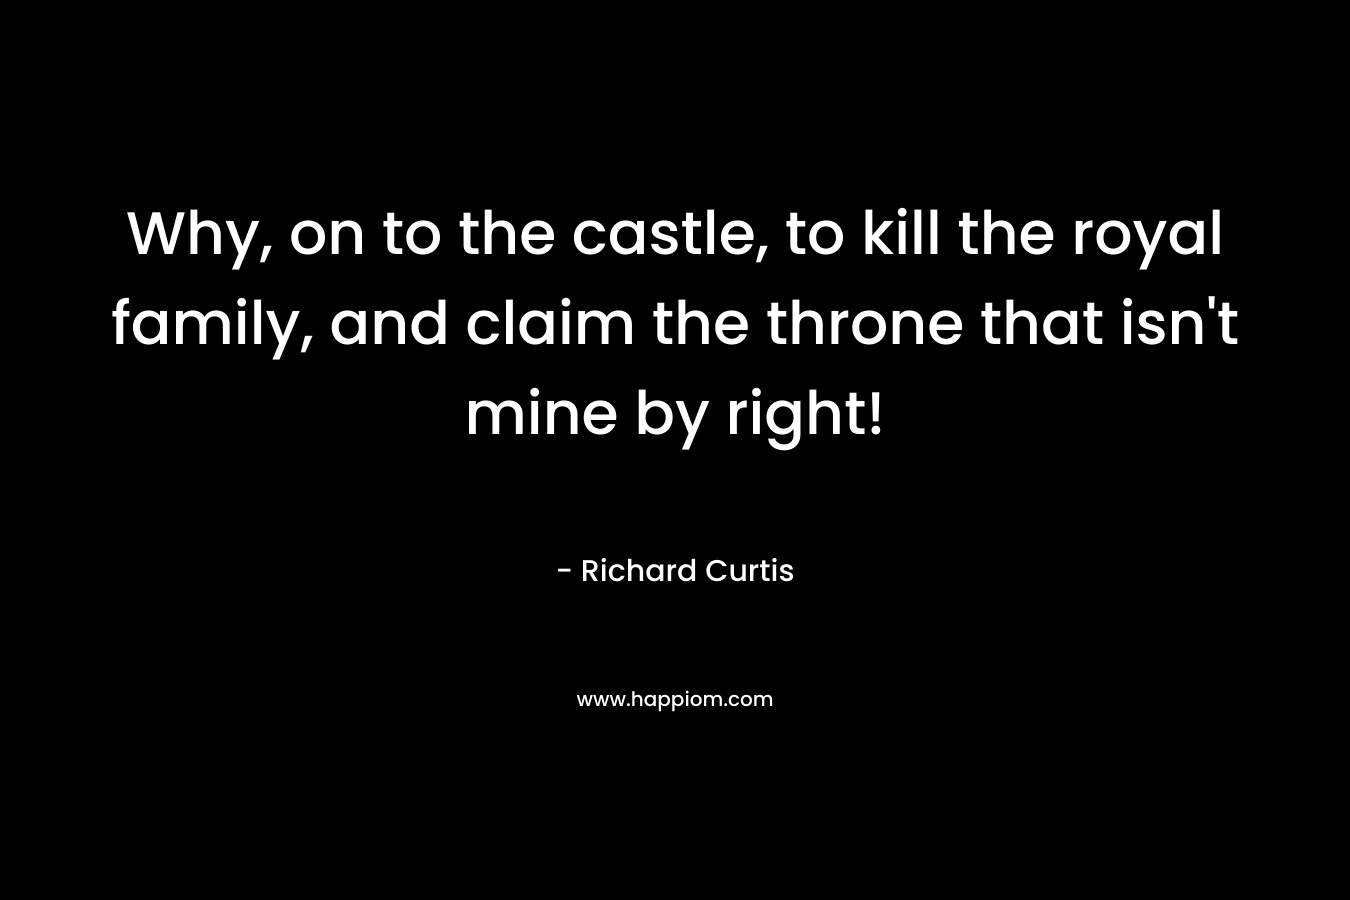 Why, on to the castle, to kill the royal family, and claim the throne that isn’t mine by right! – Richard Curtis